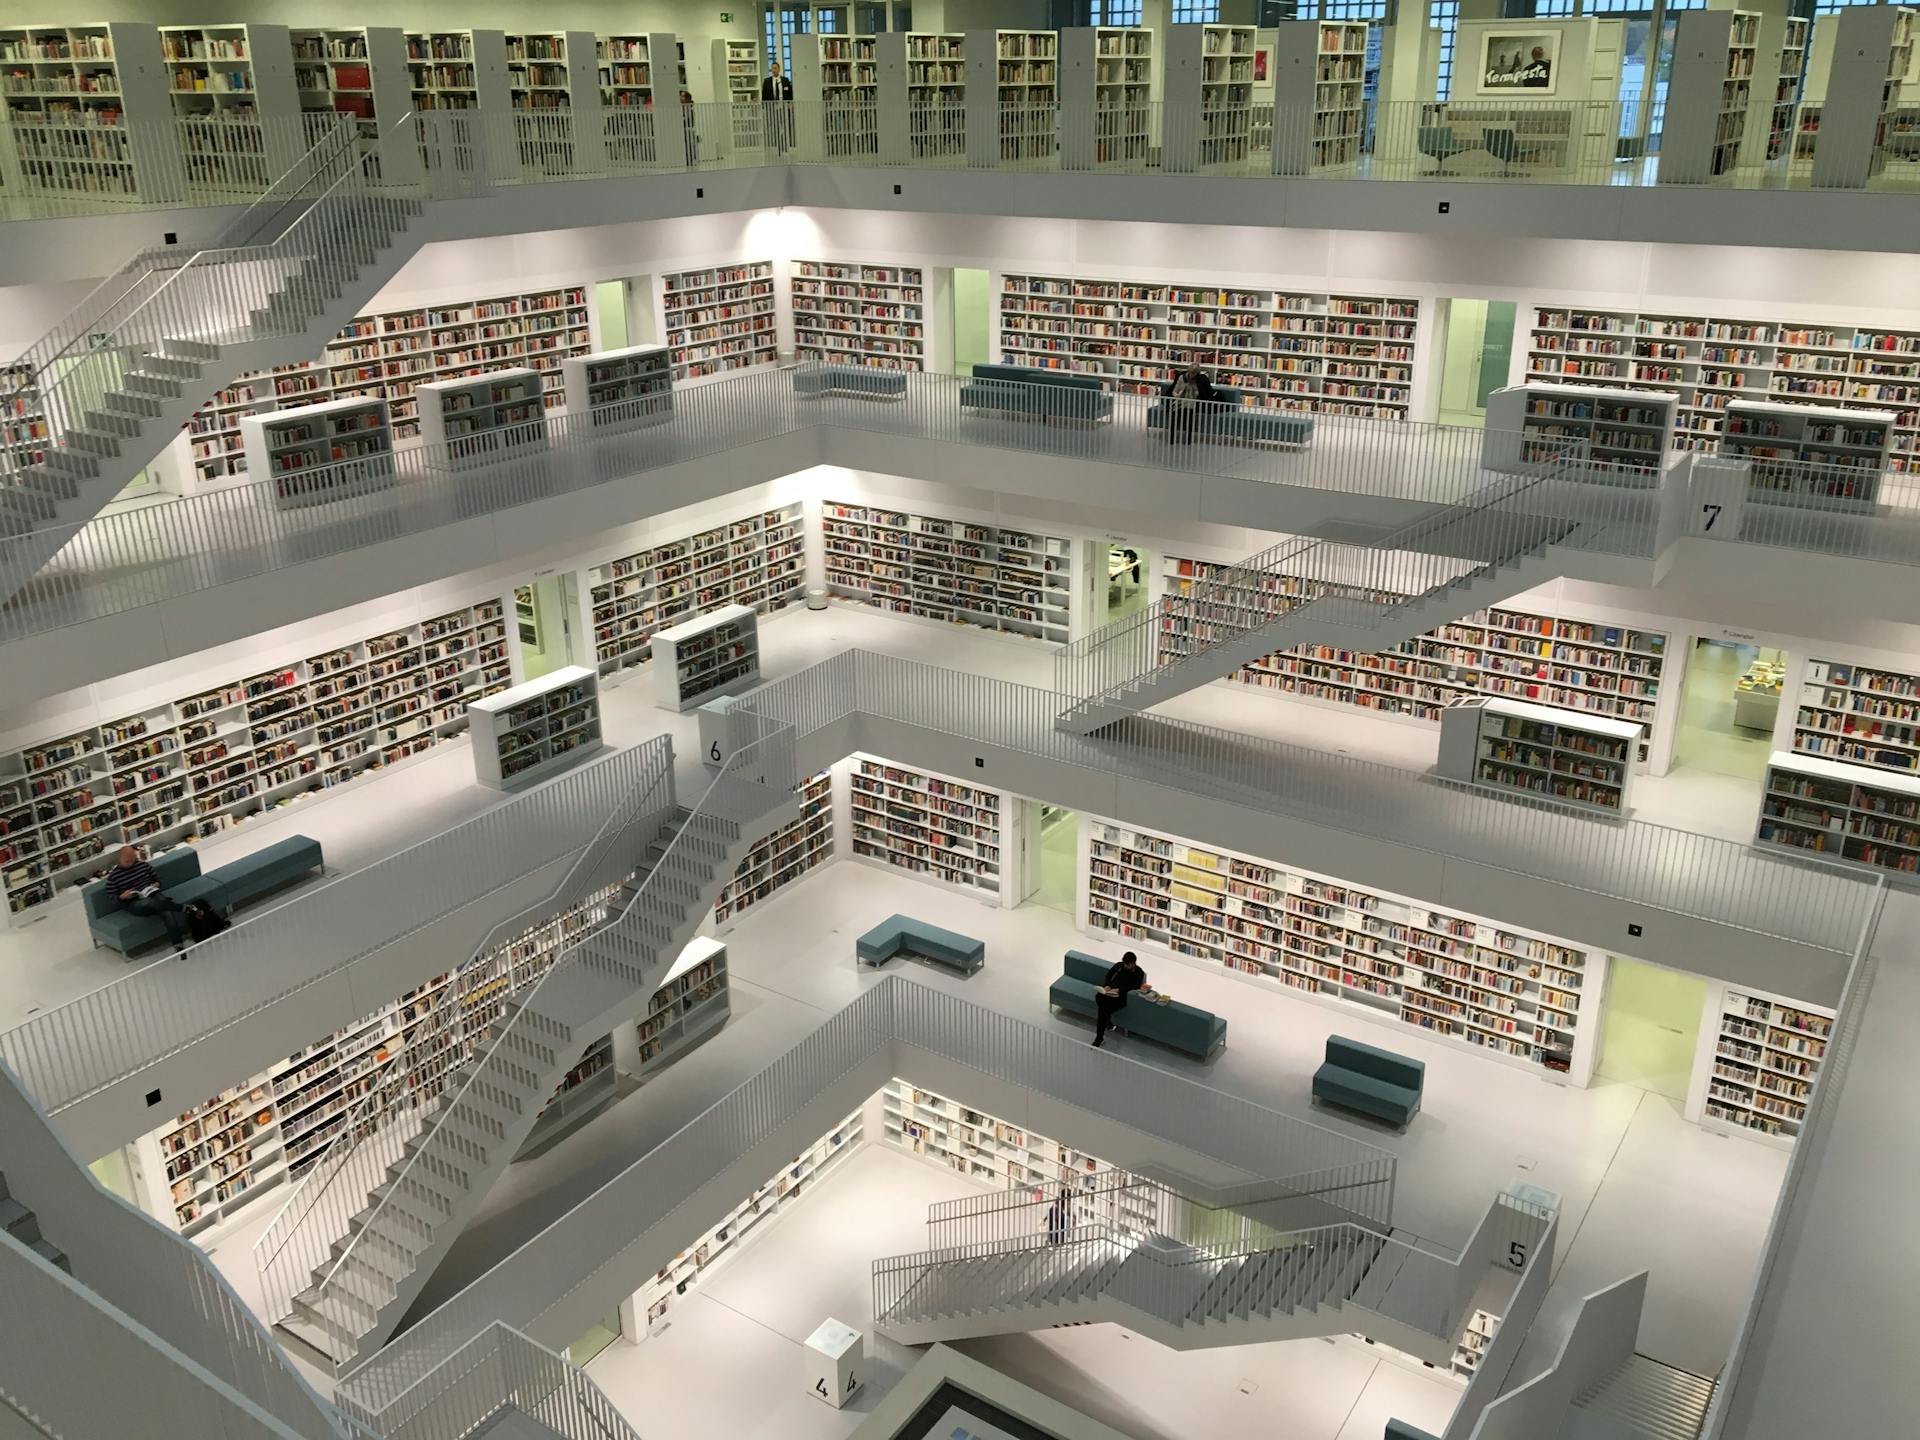 Big library with stairs